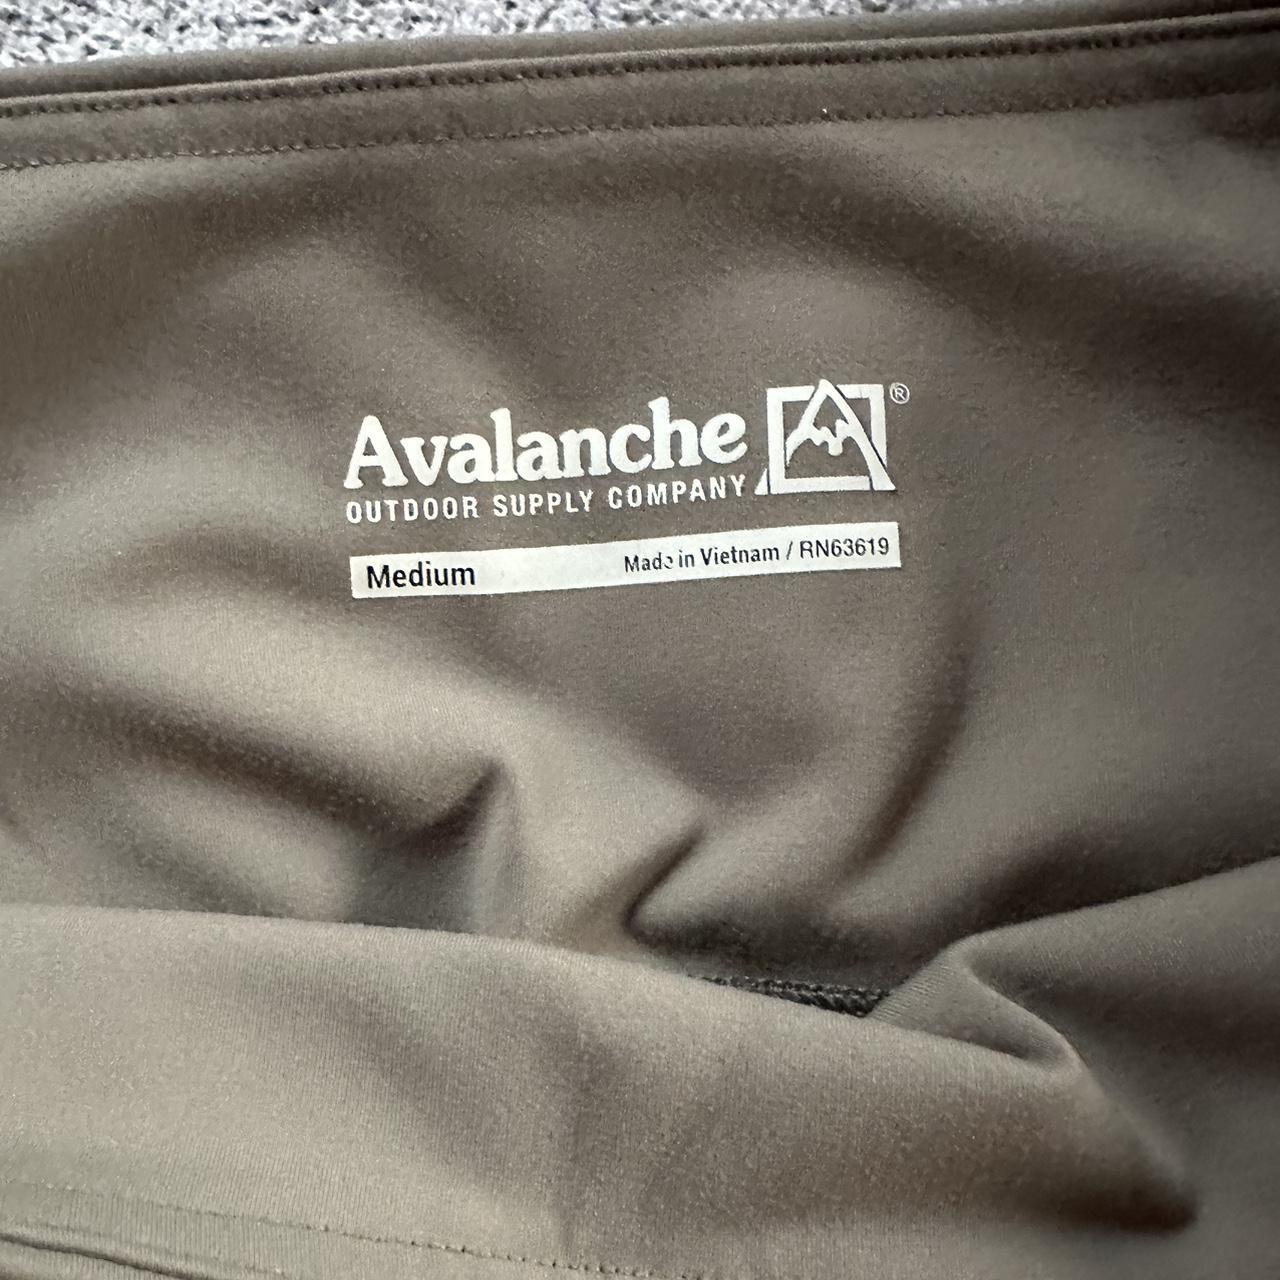 Avalanche Women’s Leggings, Brand new! Only used